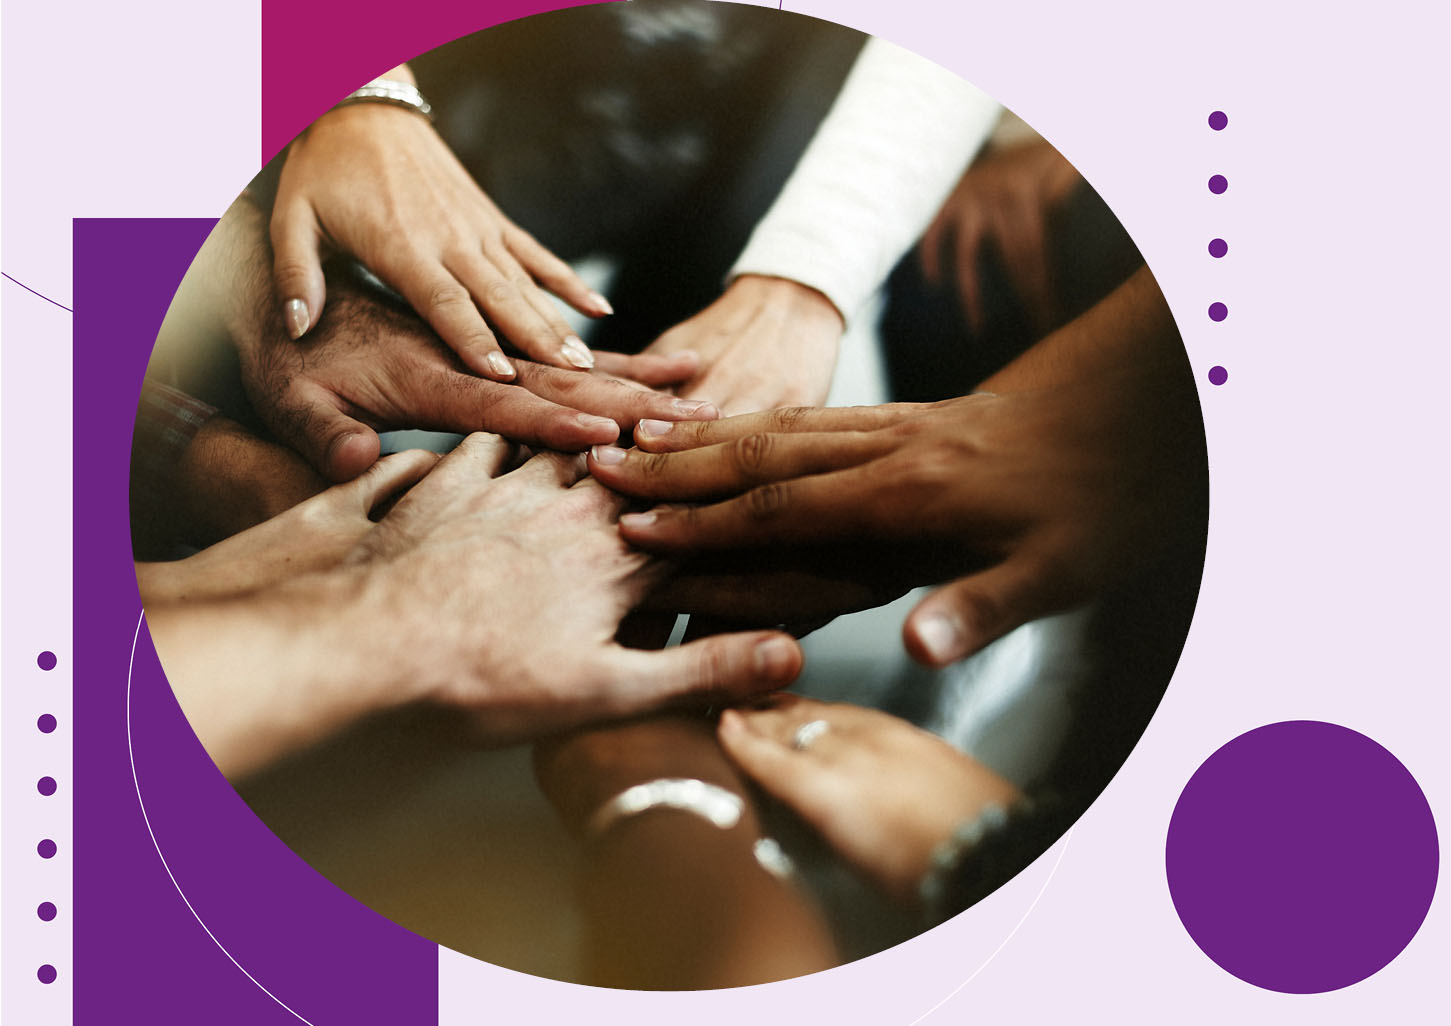 Image for chapter 2 of the safer care for all report with diverse hands touching on purple background